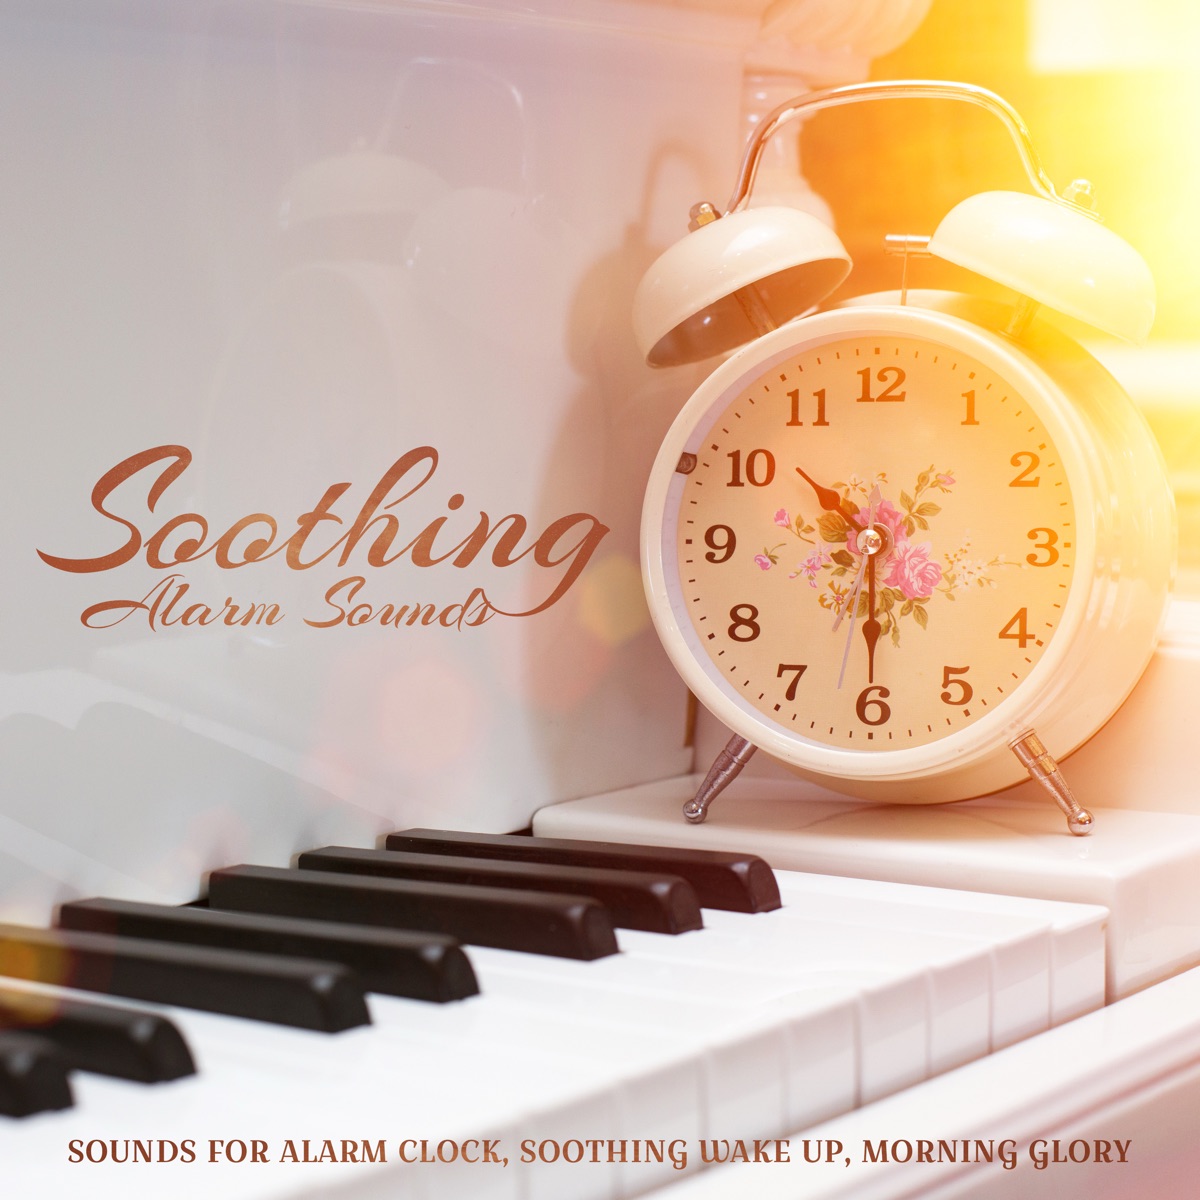 Soothing Alarm Sounds (Sounds for Alarm Clock, Soothing Wake up, Morning  Glory) - Album by Various Artists - Apple Music